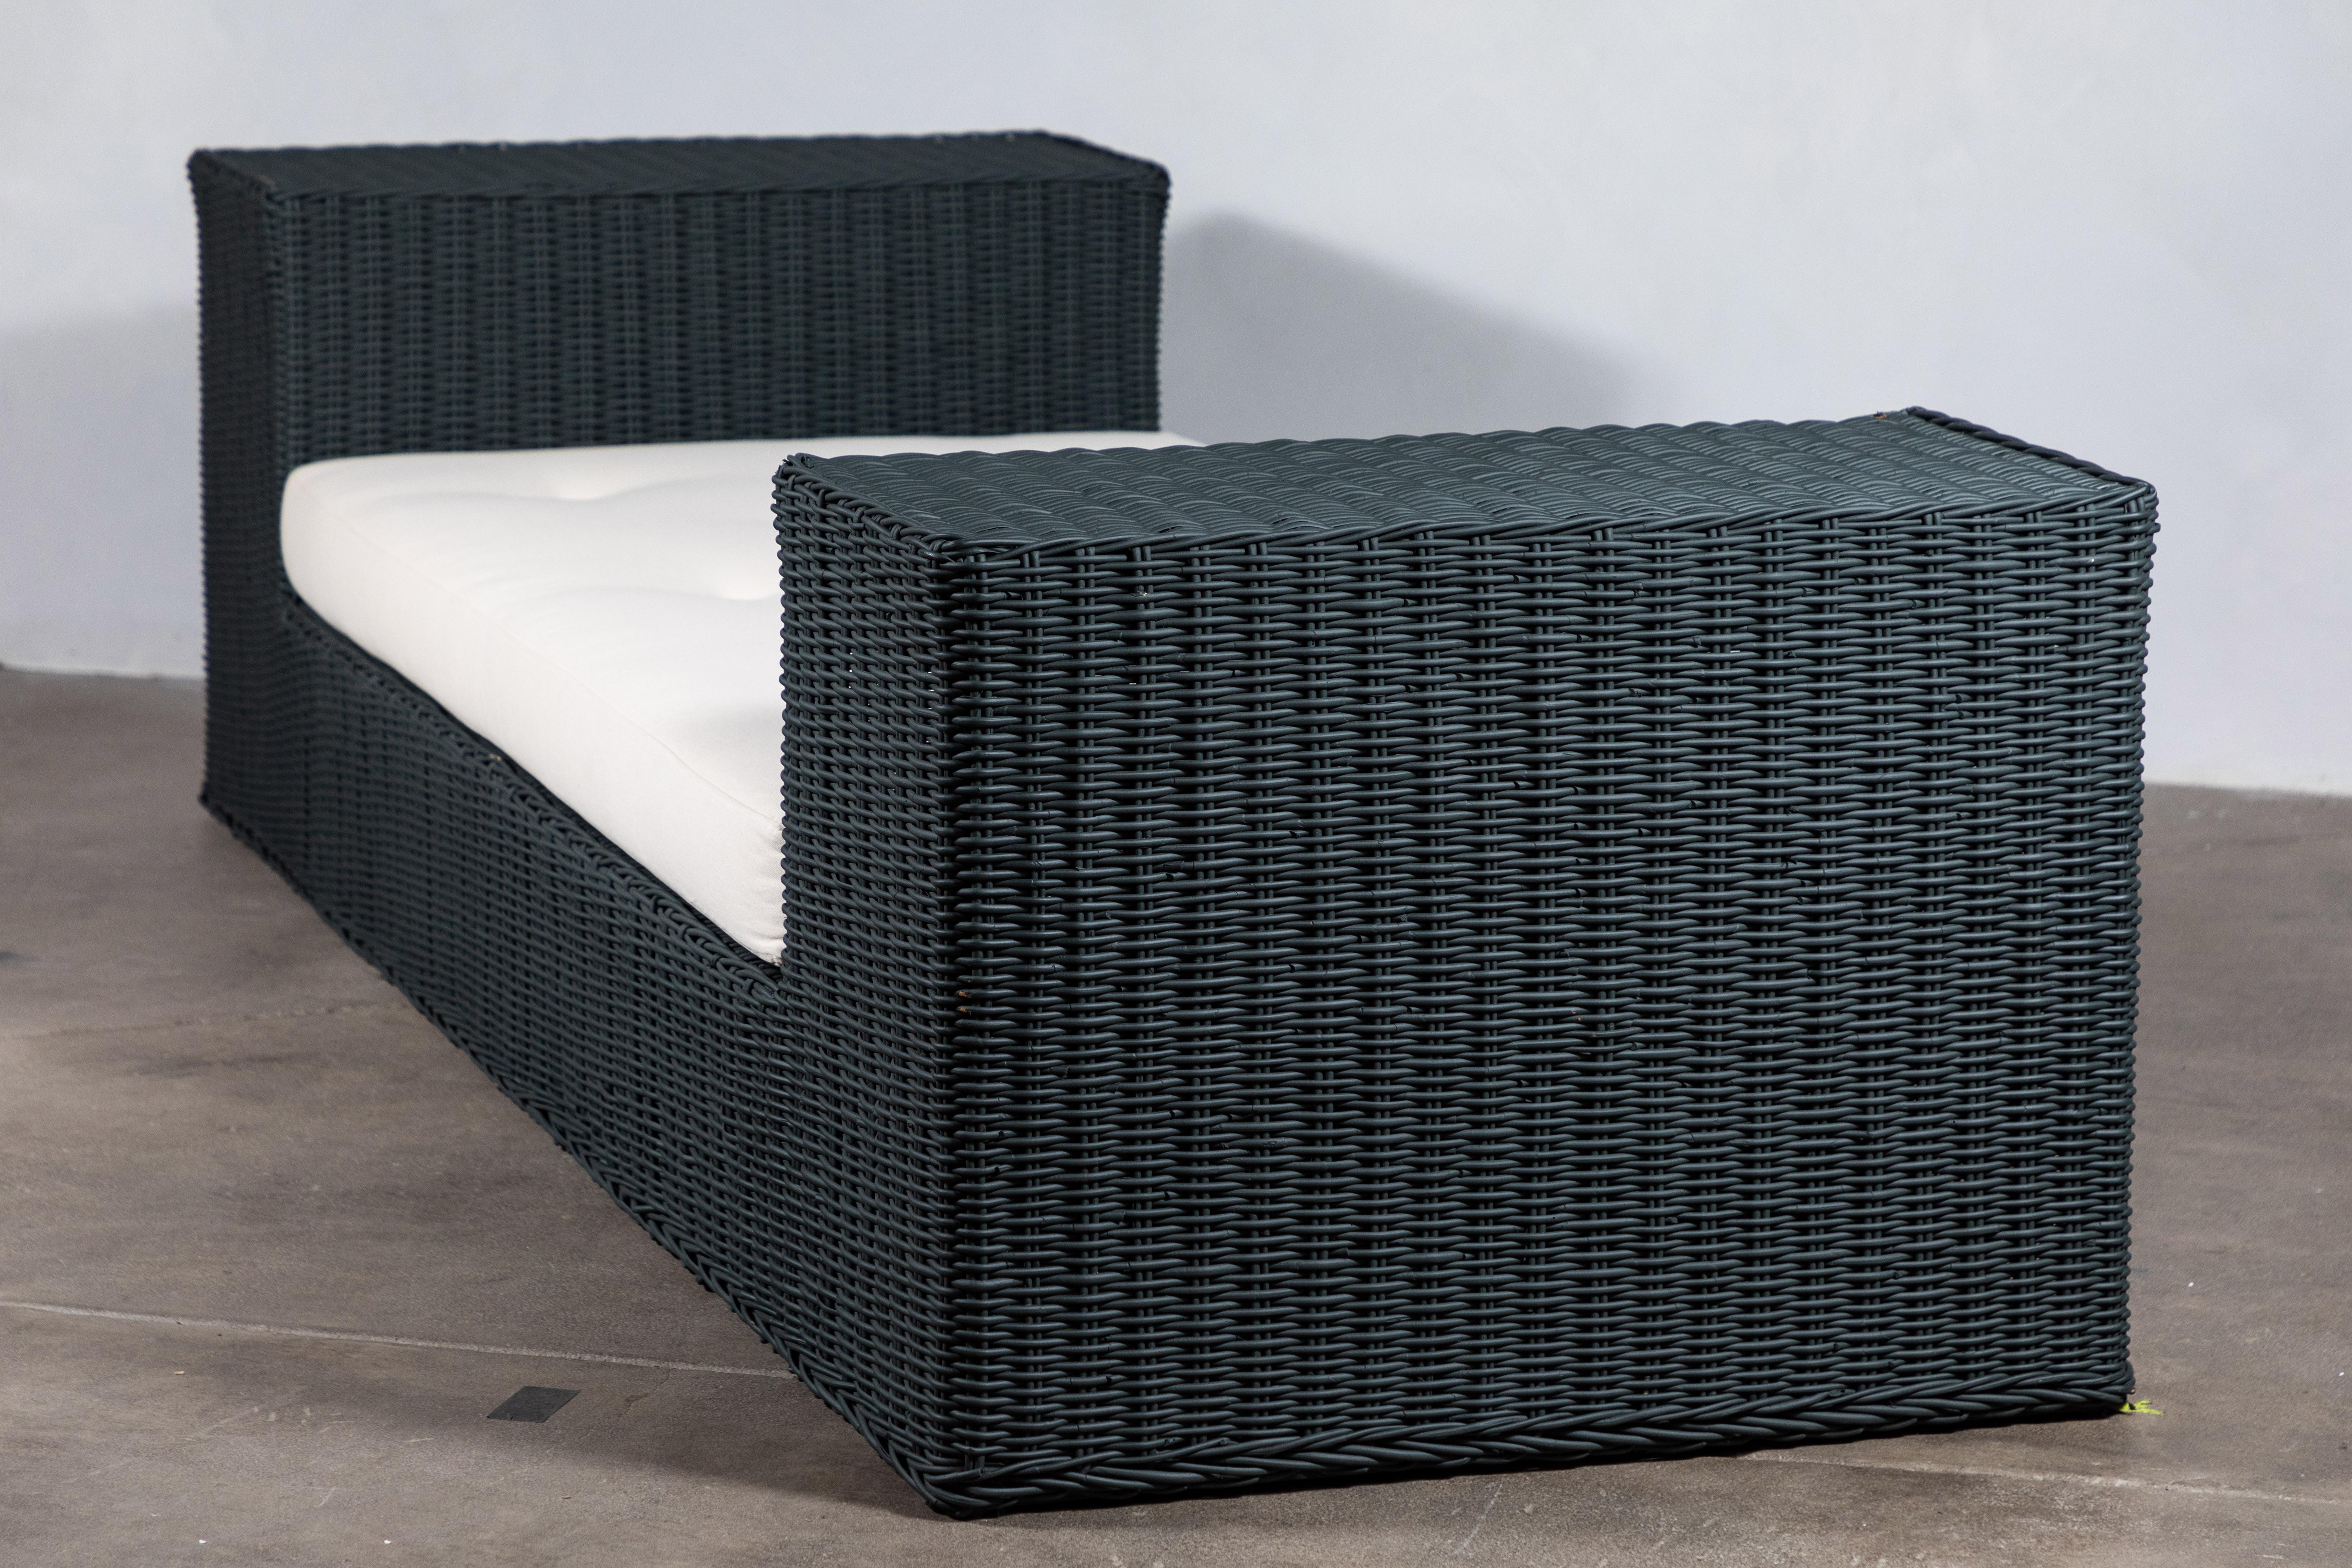 Late 20th Century Green Painted Wicker Daybed with Tufted Hemp linen Cushion